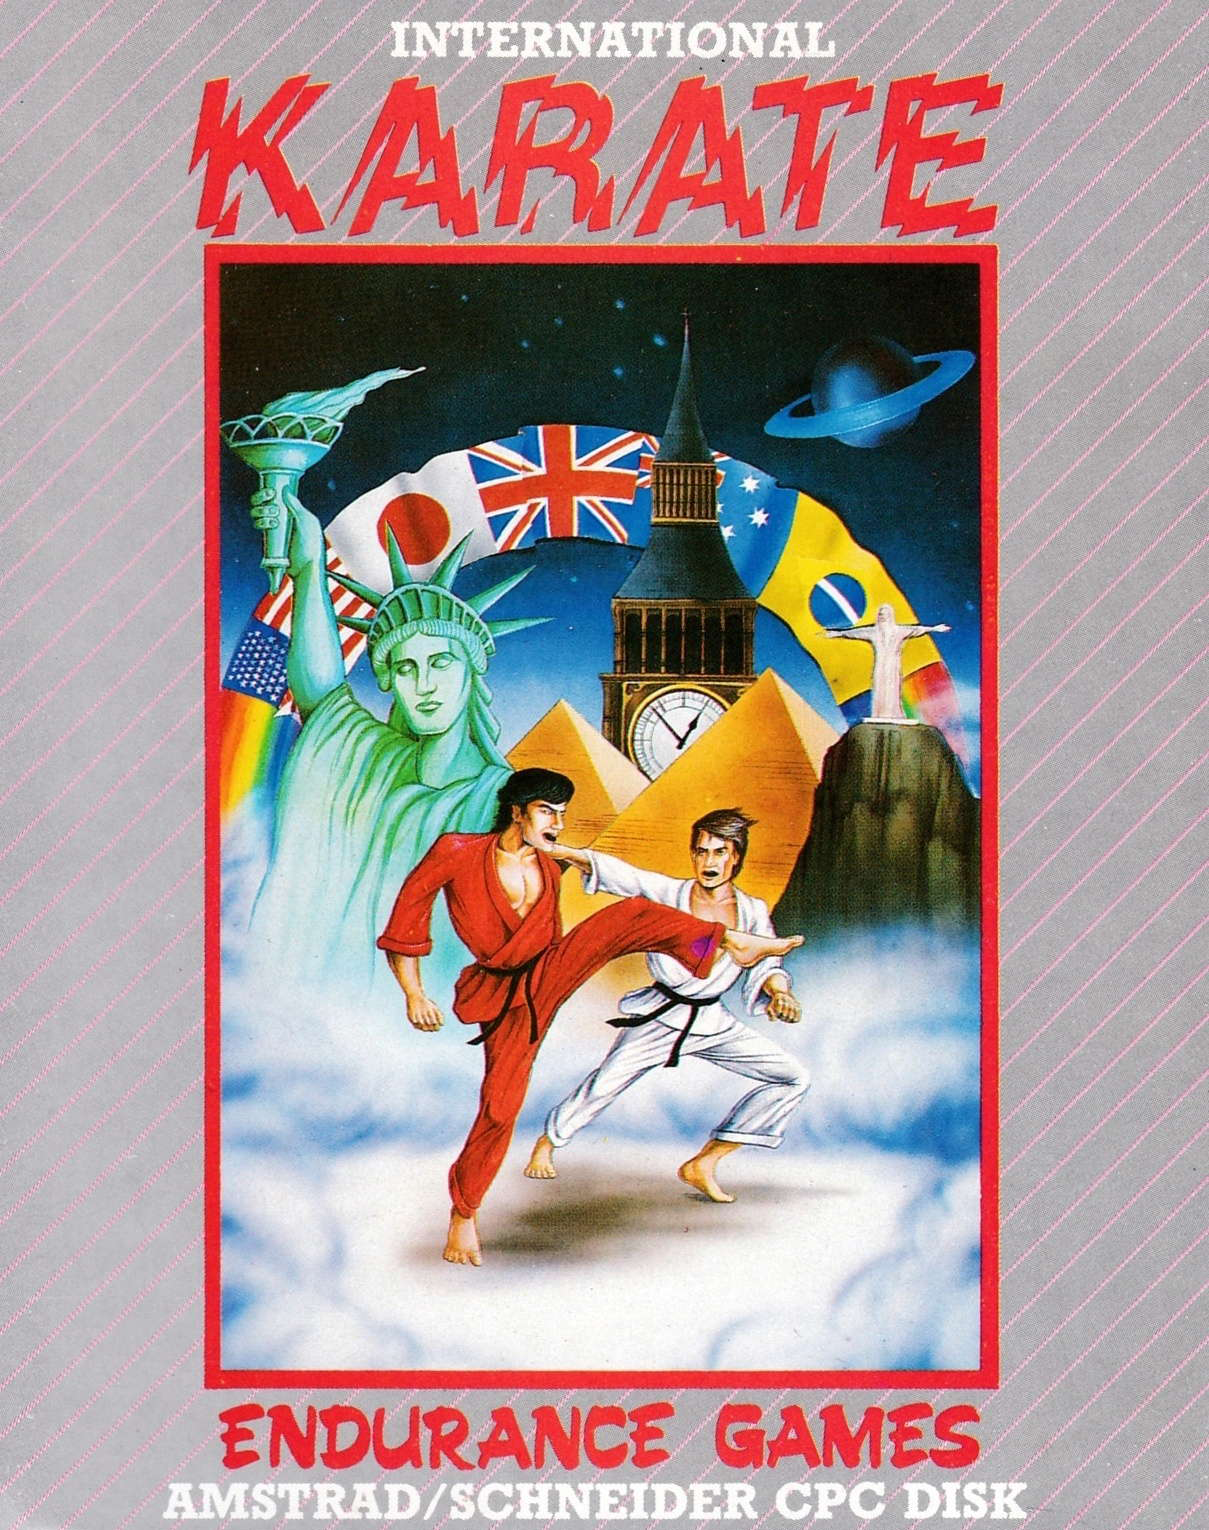 screenshot of the Amstrad CPC game International karate by GameBase CPC